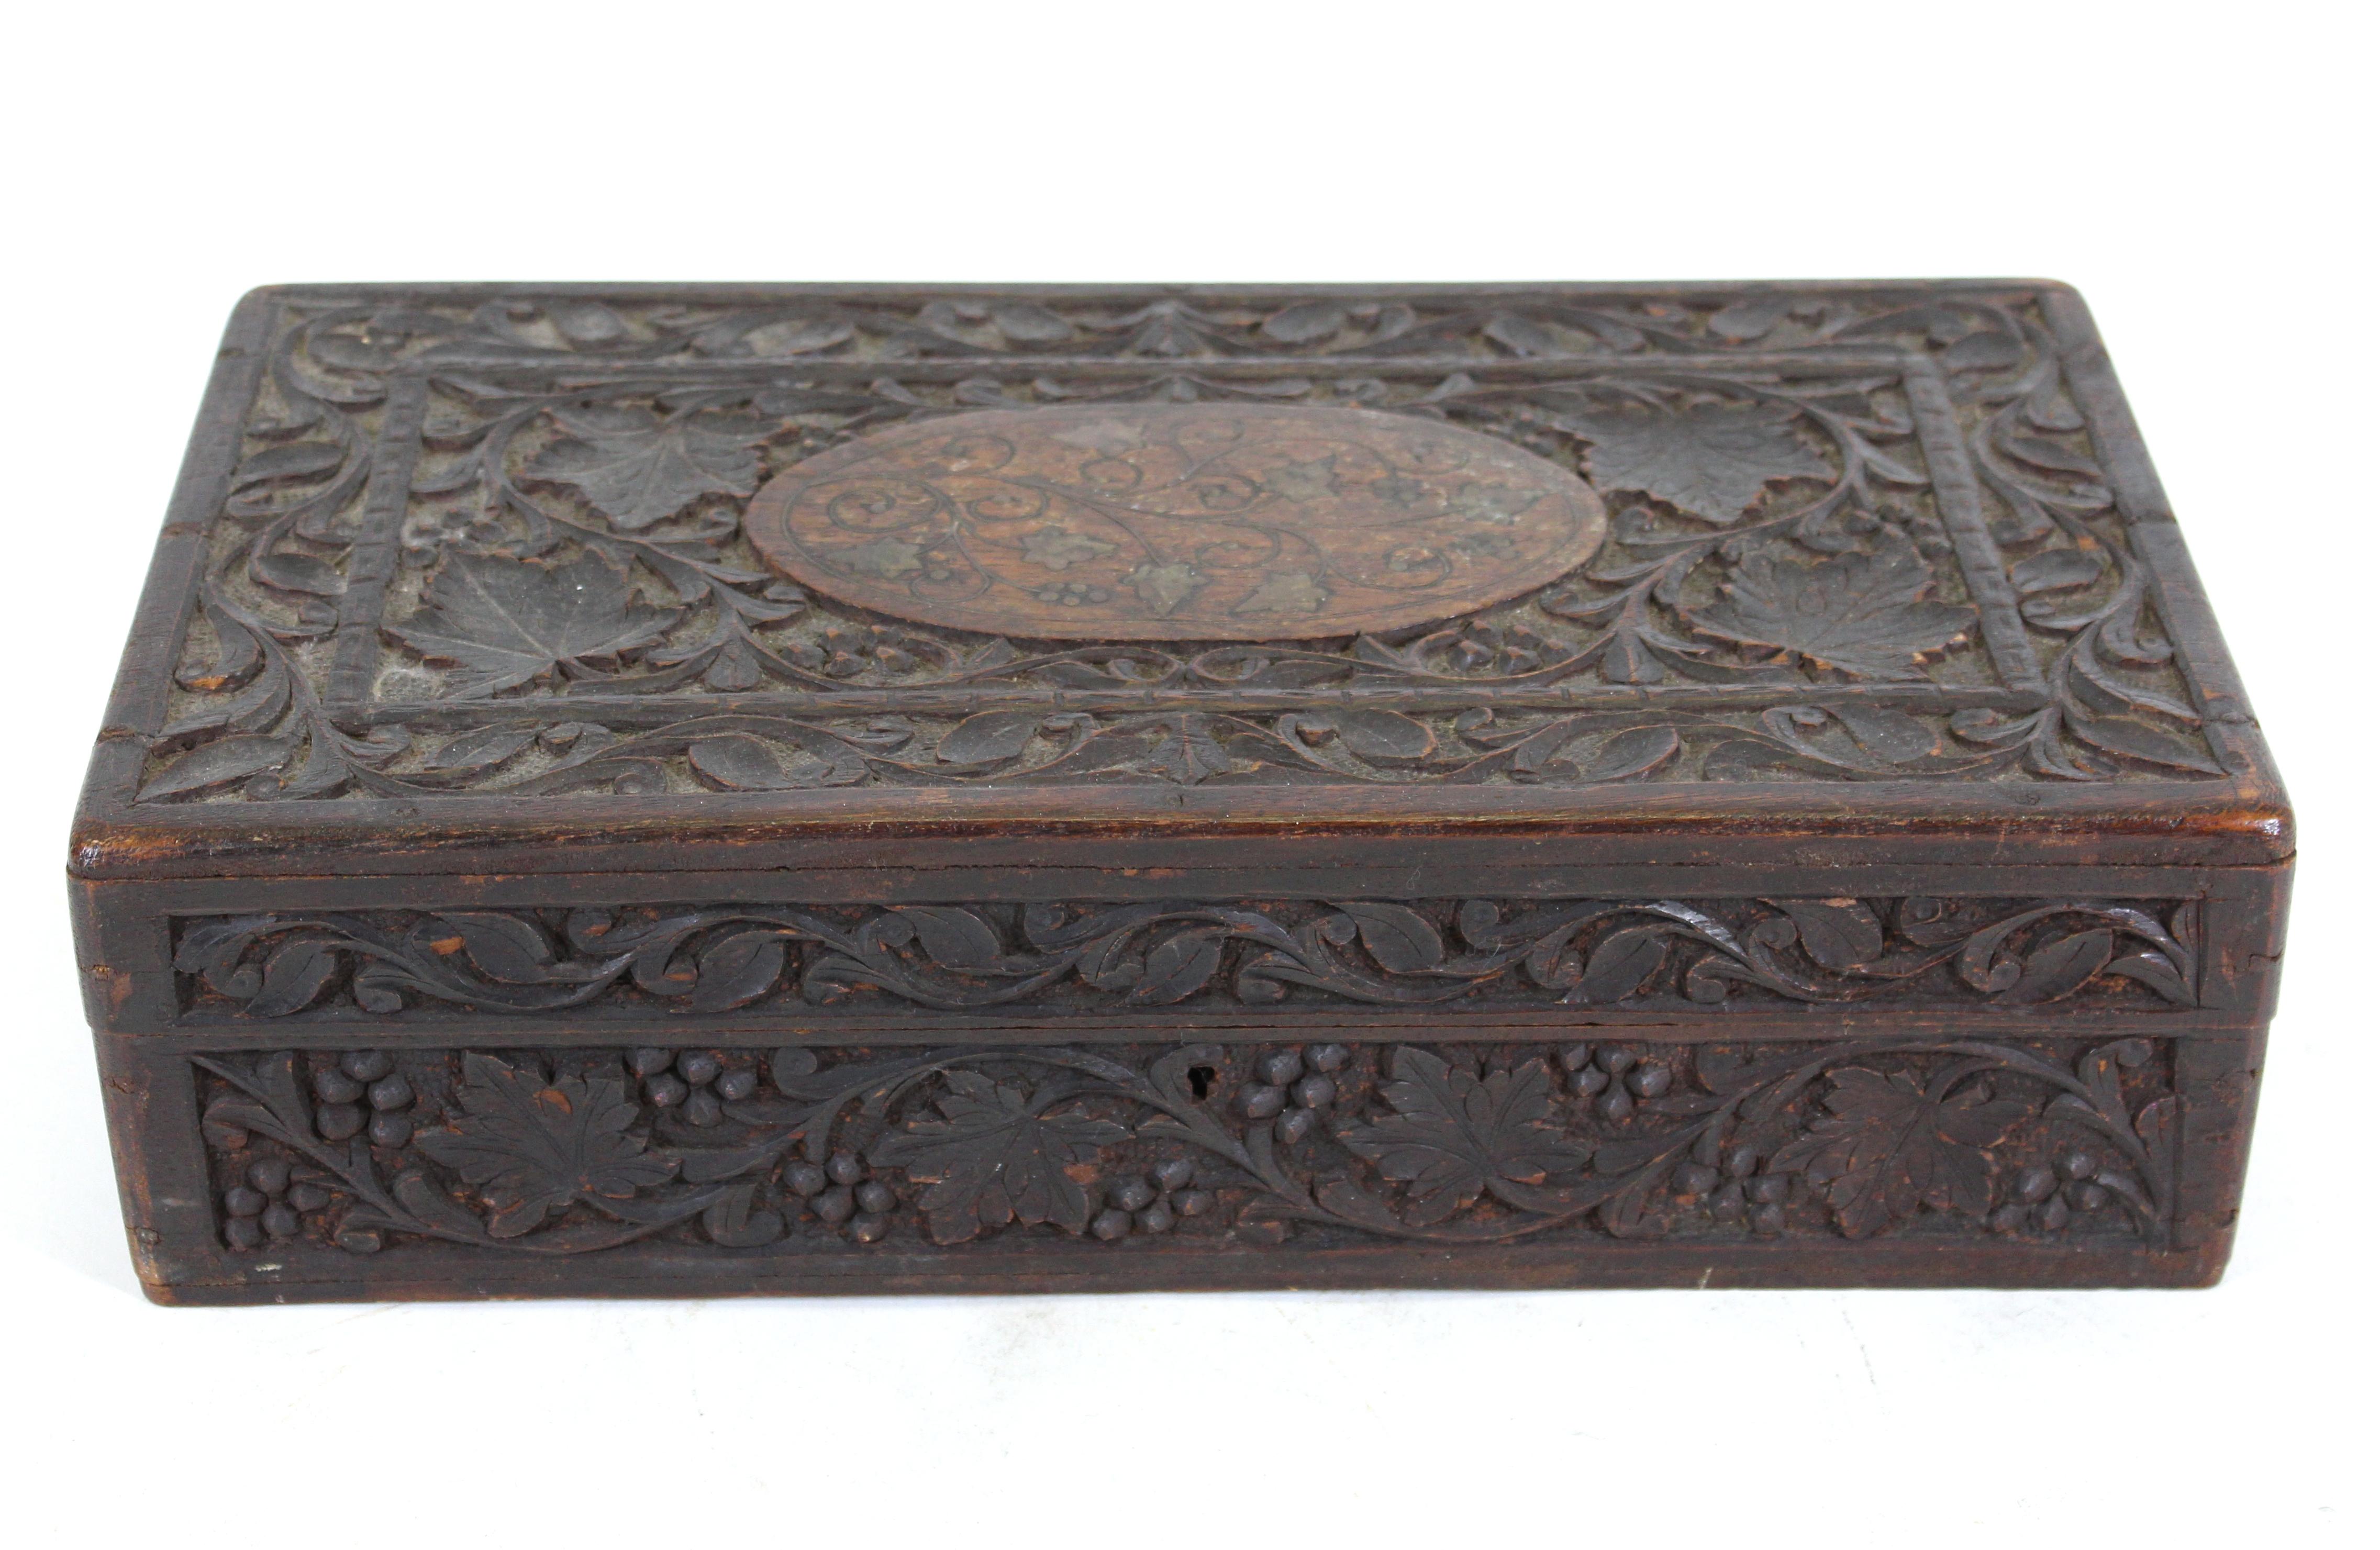 Indian antique carved wood humidor box with ornamental metal inlay.